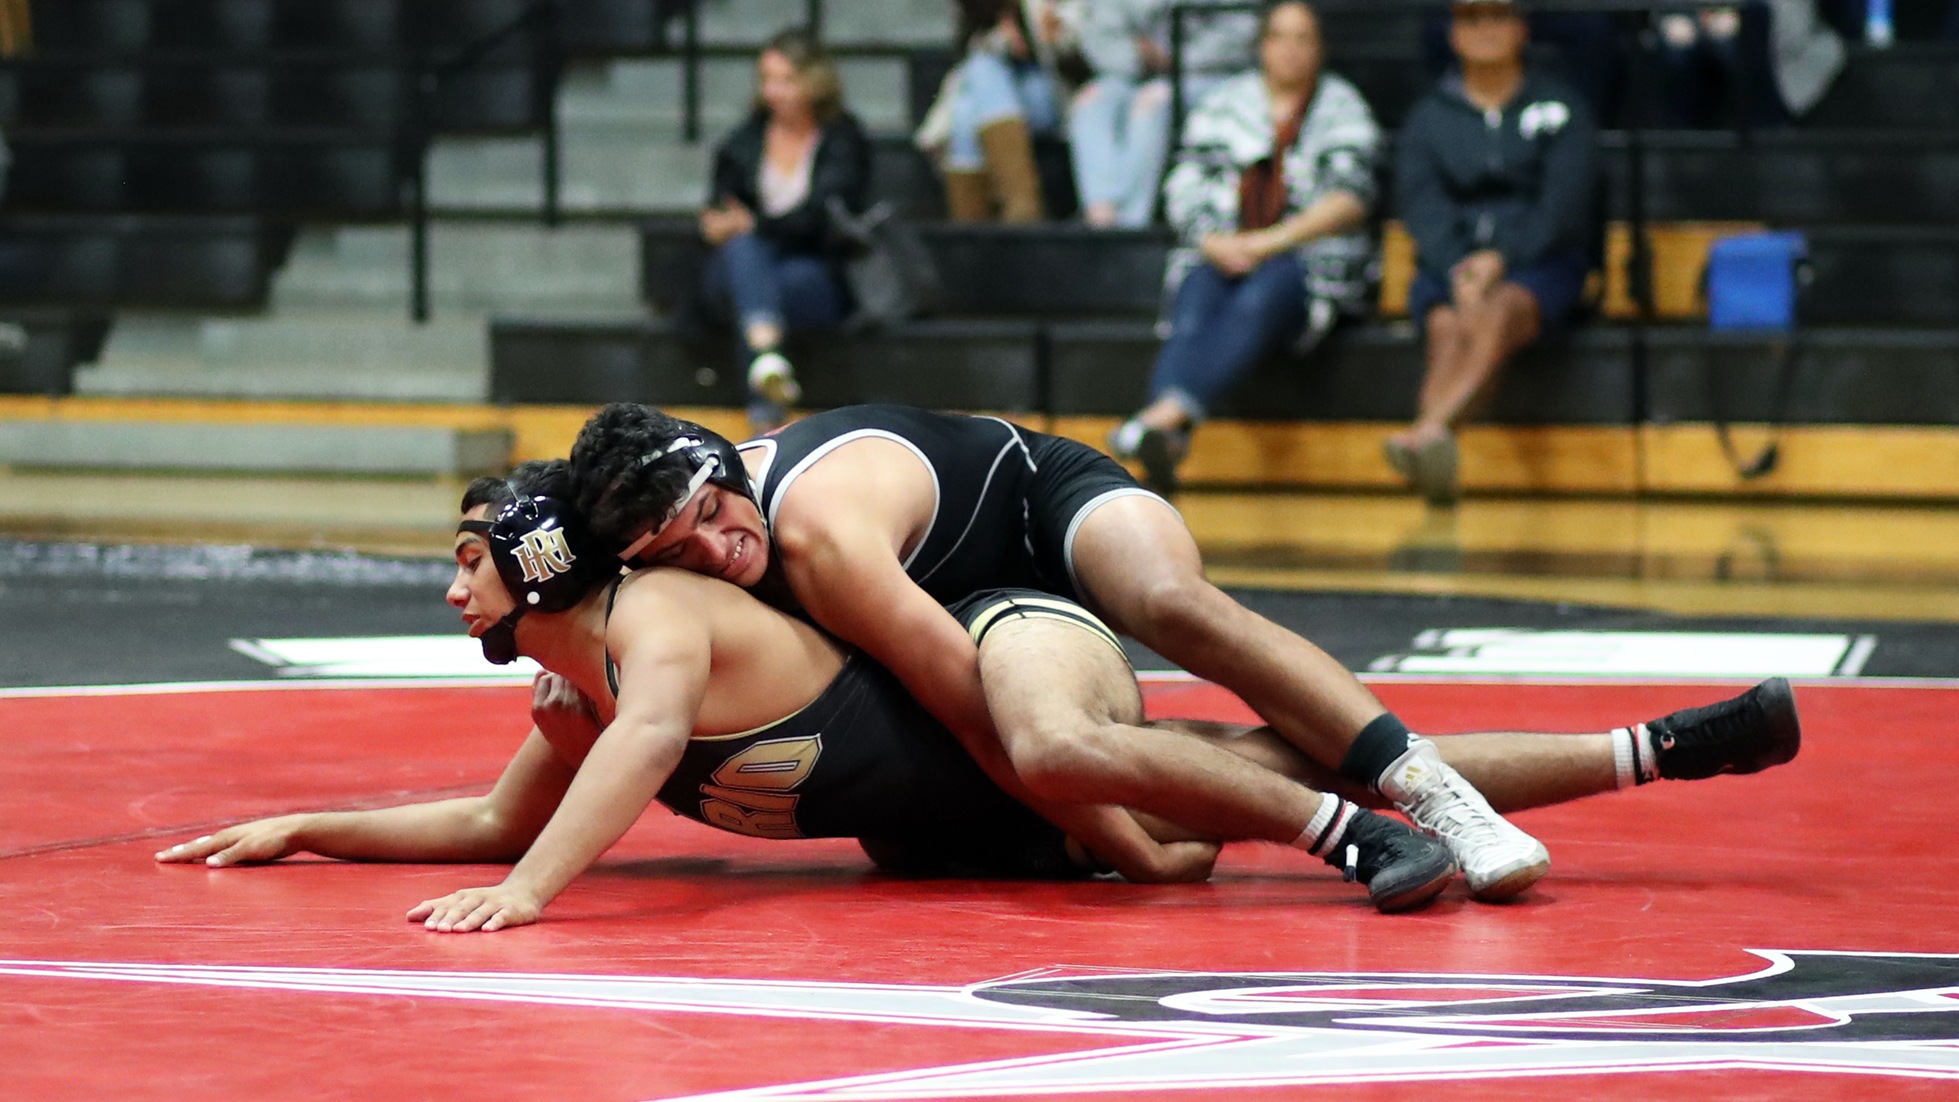 Frank Sanchez gets the two-point take down in the 165-weight class. Photo by Hugh Cox.